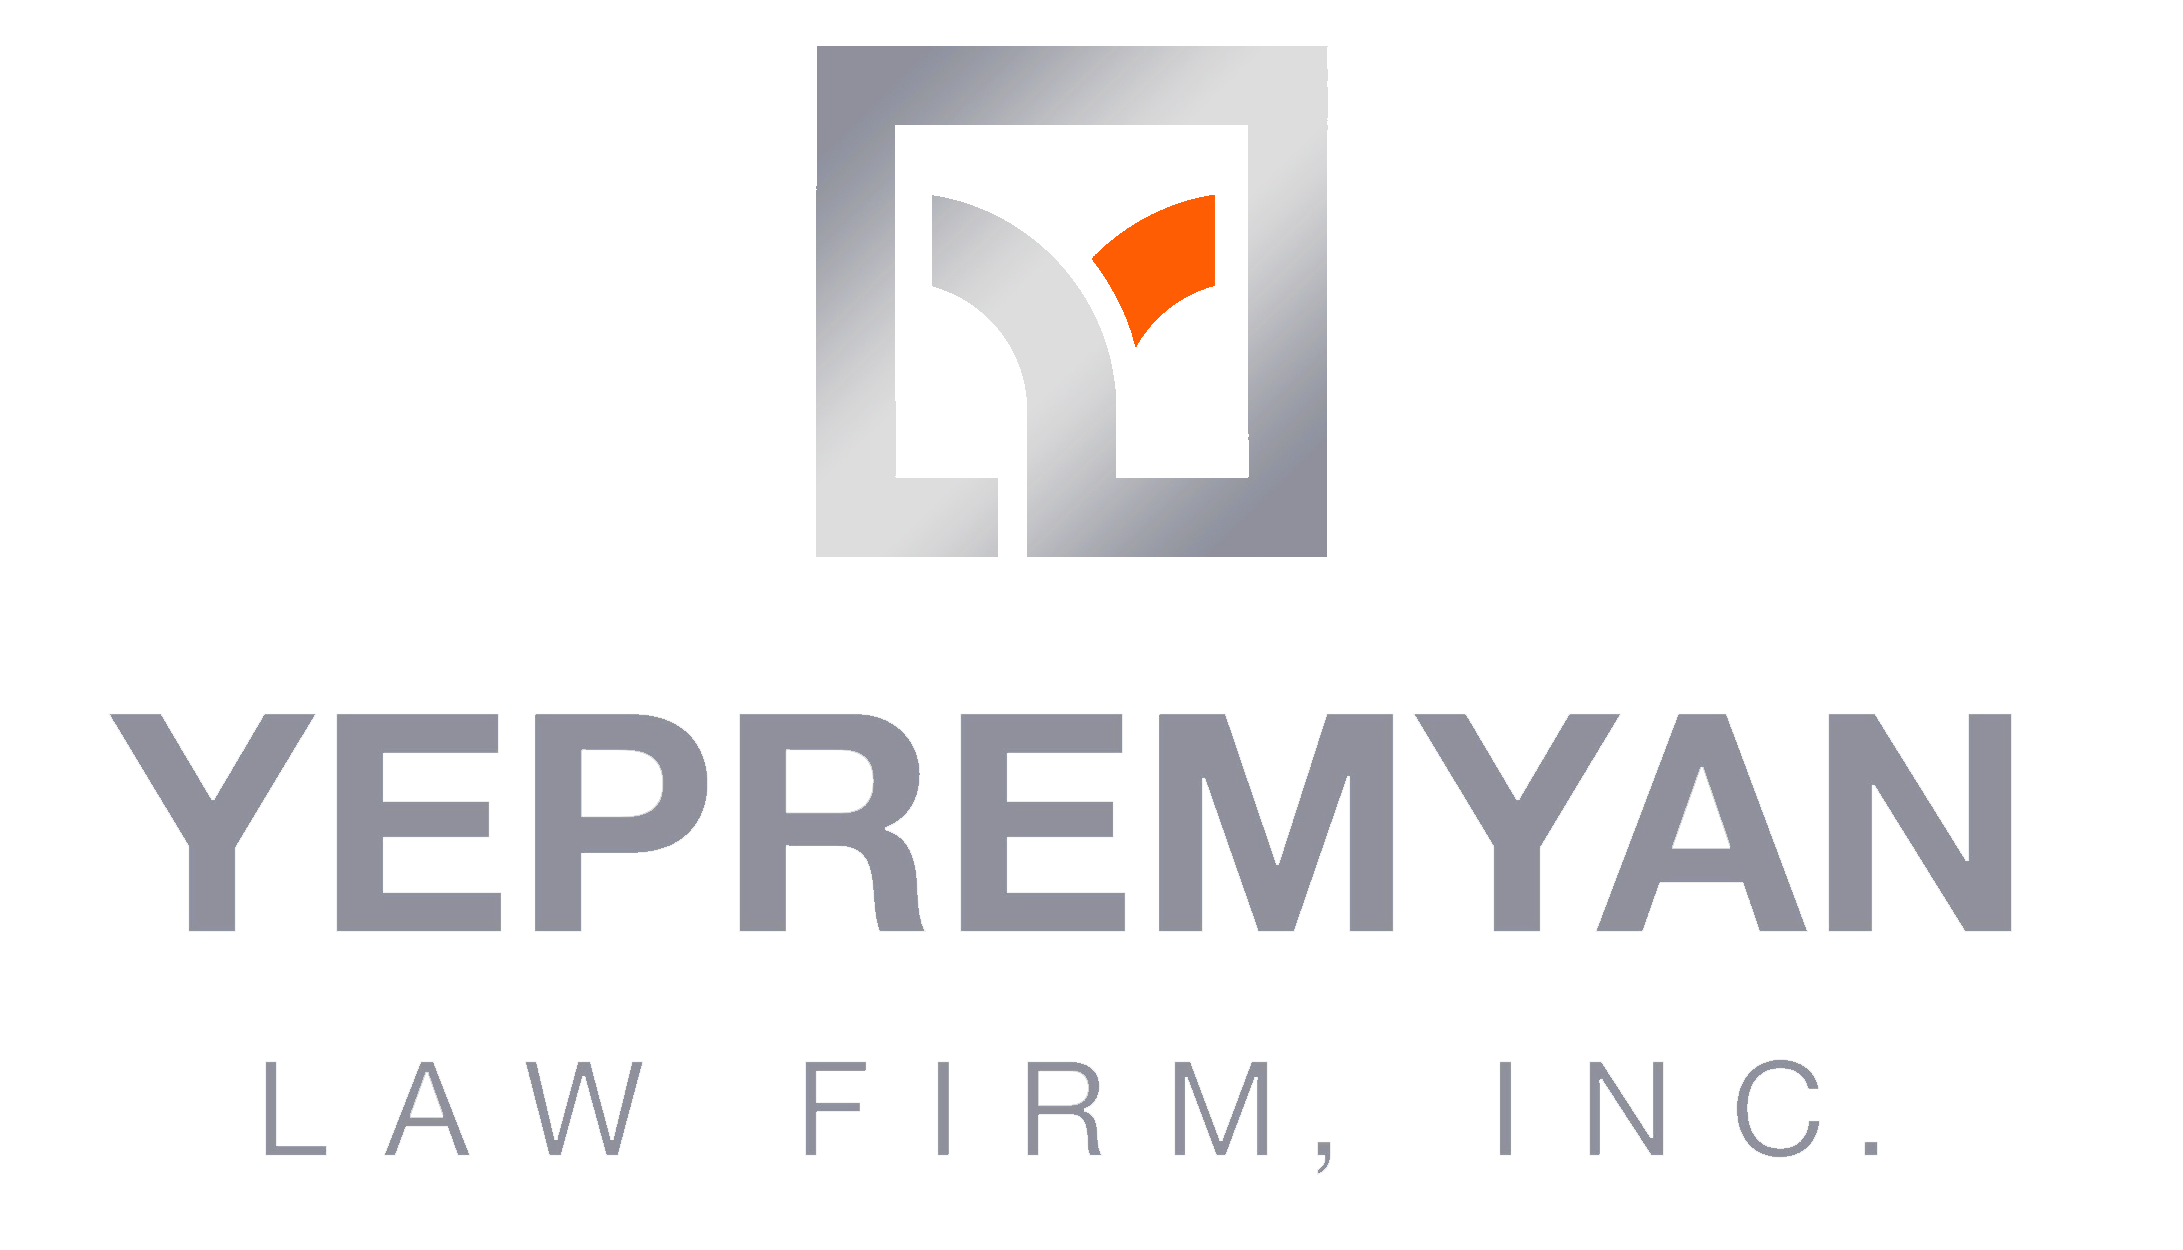 Business Attorney and Personal Injury Practice | Los Angeles | Yepremyan Law Firm